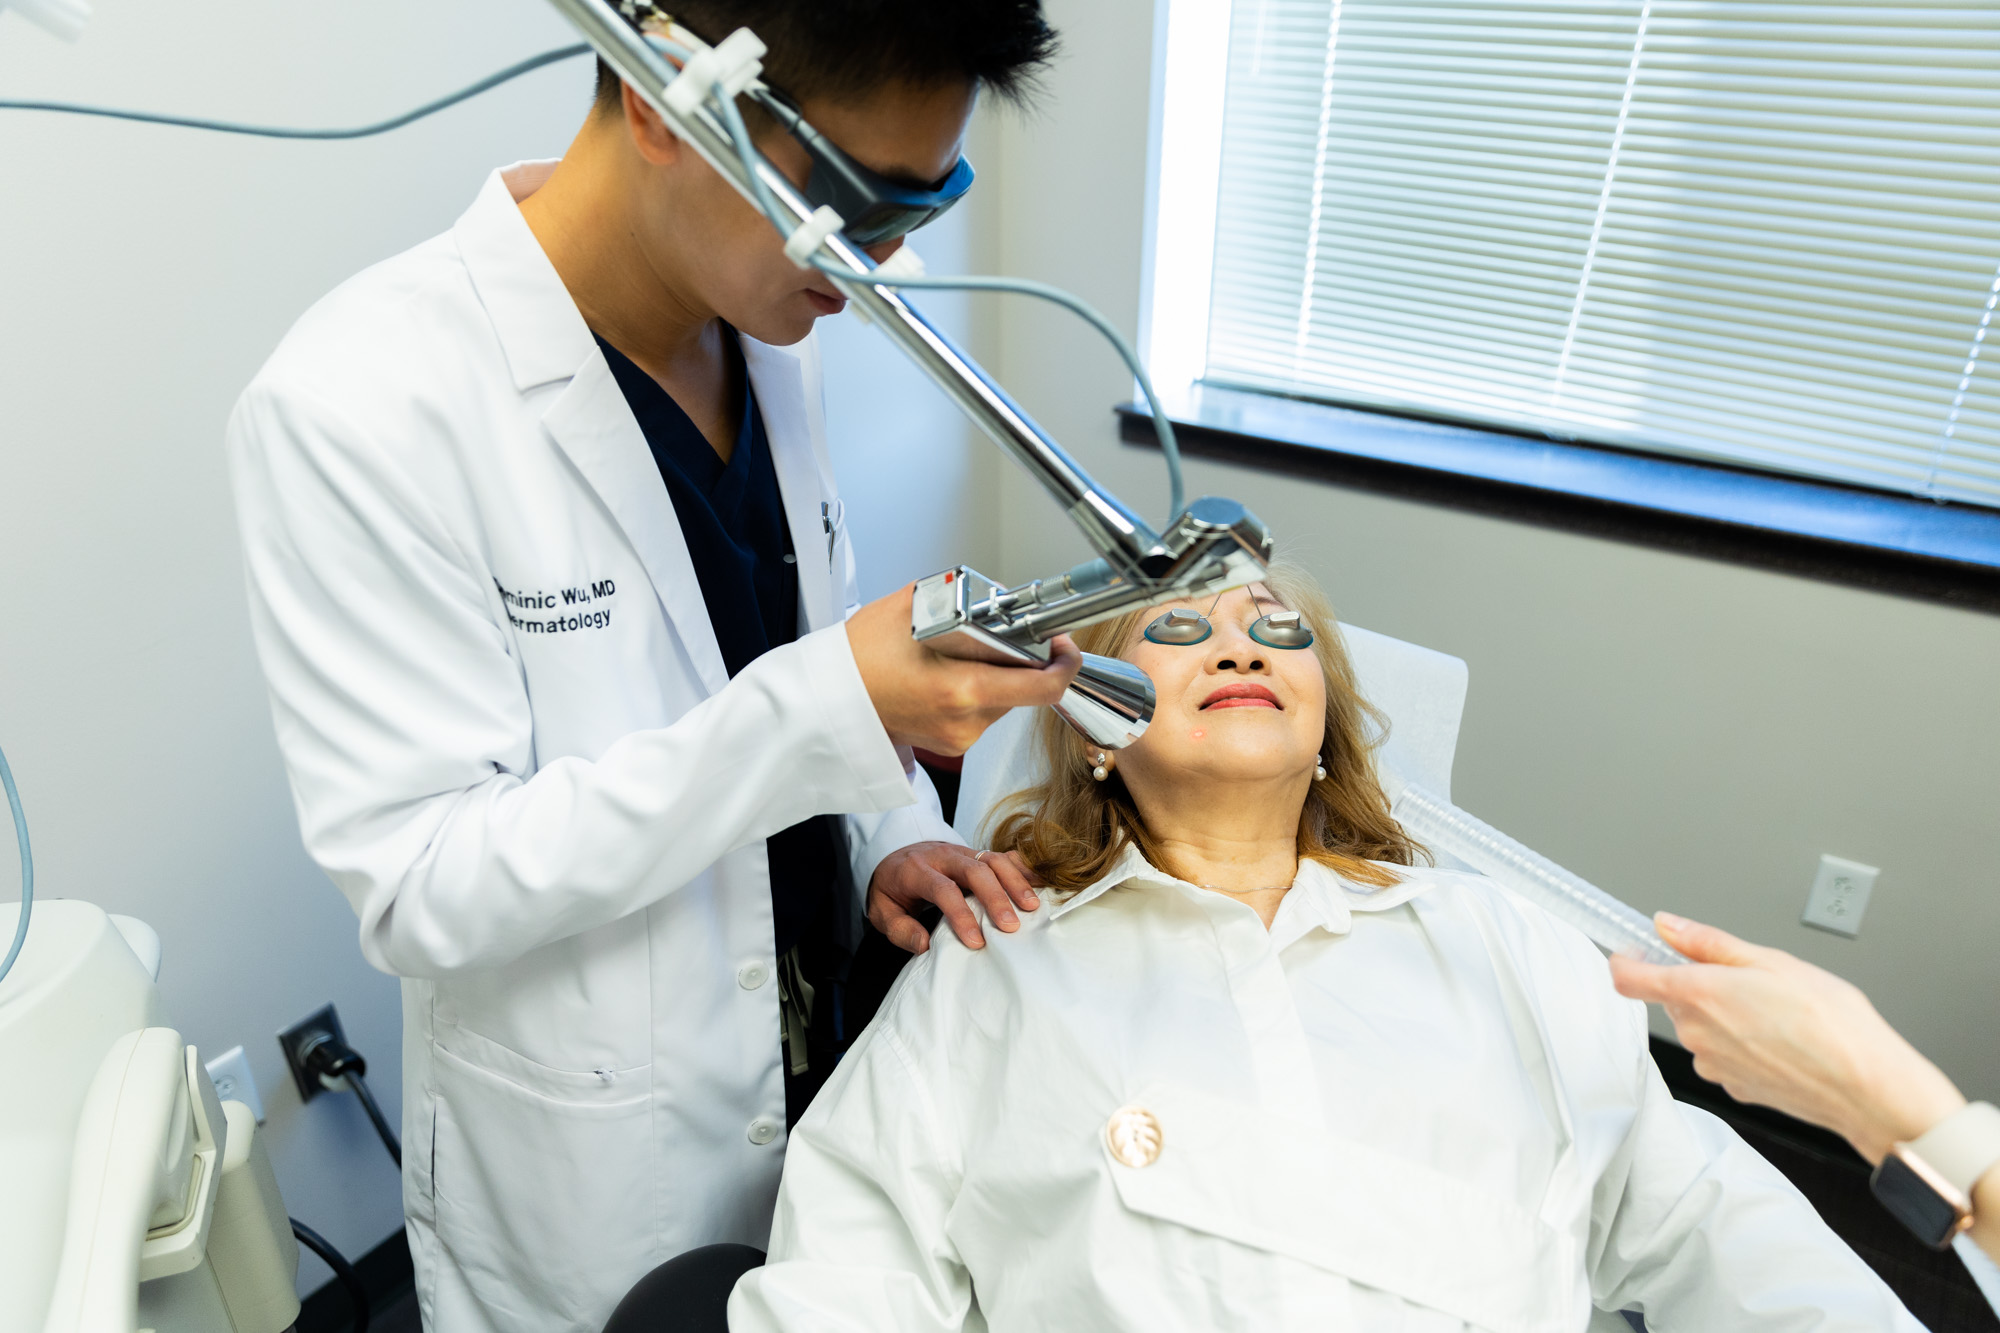 A Kansas City Skin and Cancer Center doctor holds the Contour TRL machine several inches away from a female client's face. The client is lying down with eye protection on.